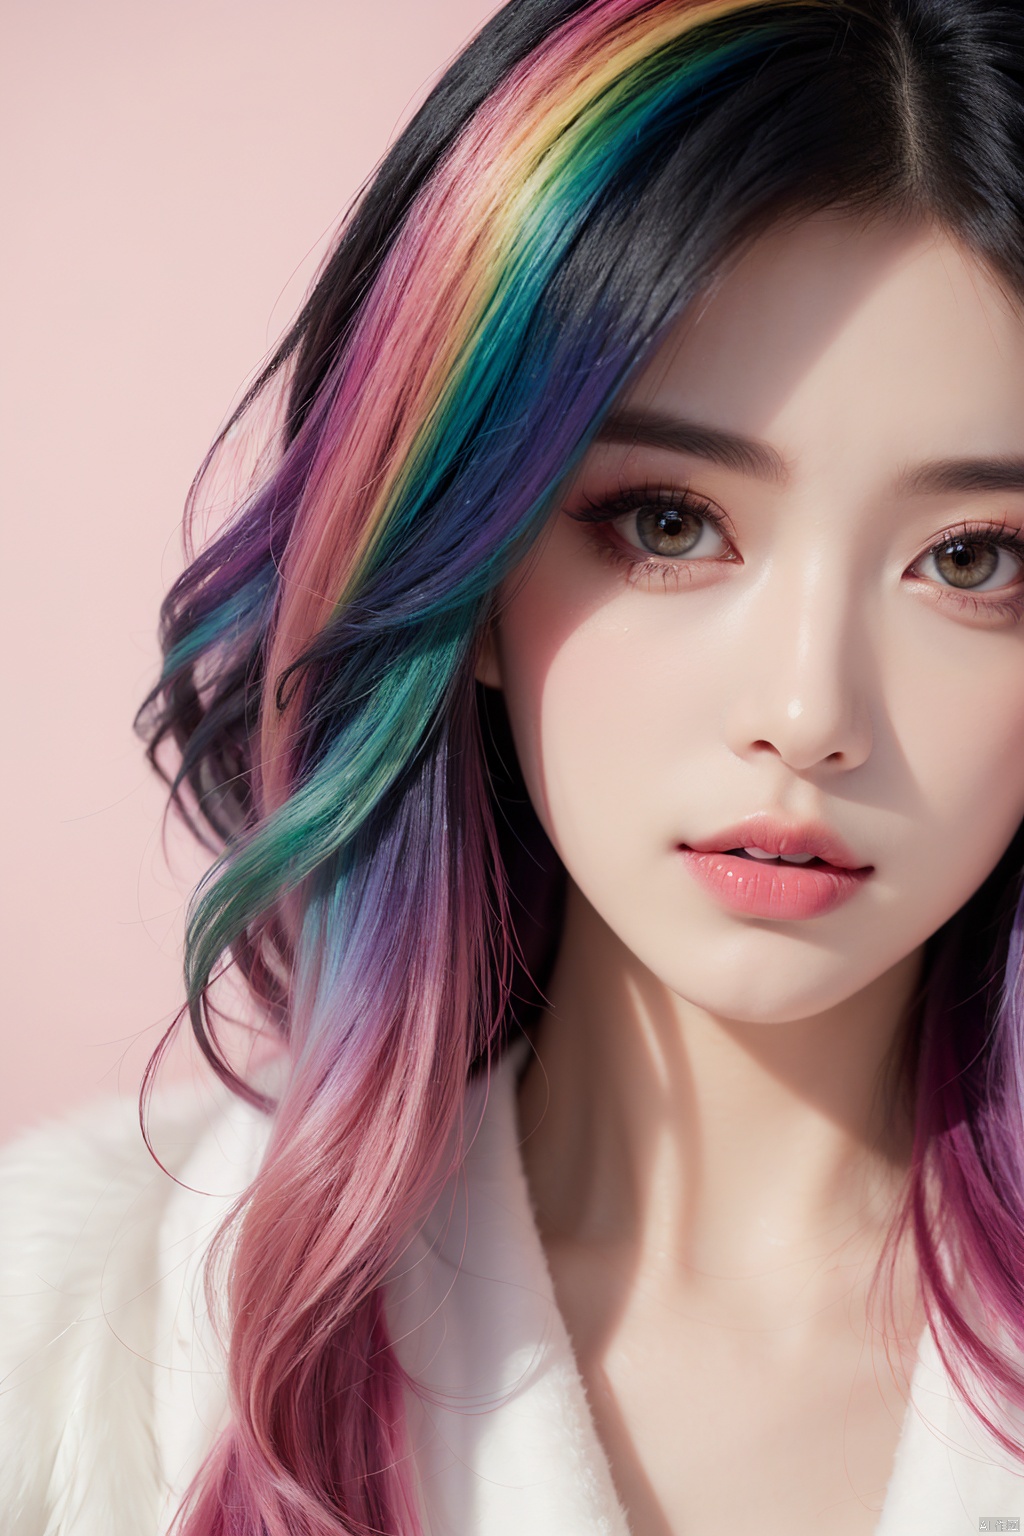 masterpiece, best quality, 1girl, pure rainbow background, ((rainbow swirling vortexes colourful hair)), wear white fur coat, ((long Hair)), front, emotional face, ((close up, studio light, studio)), (((makeup portrait, pink eye shadow)))
